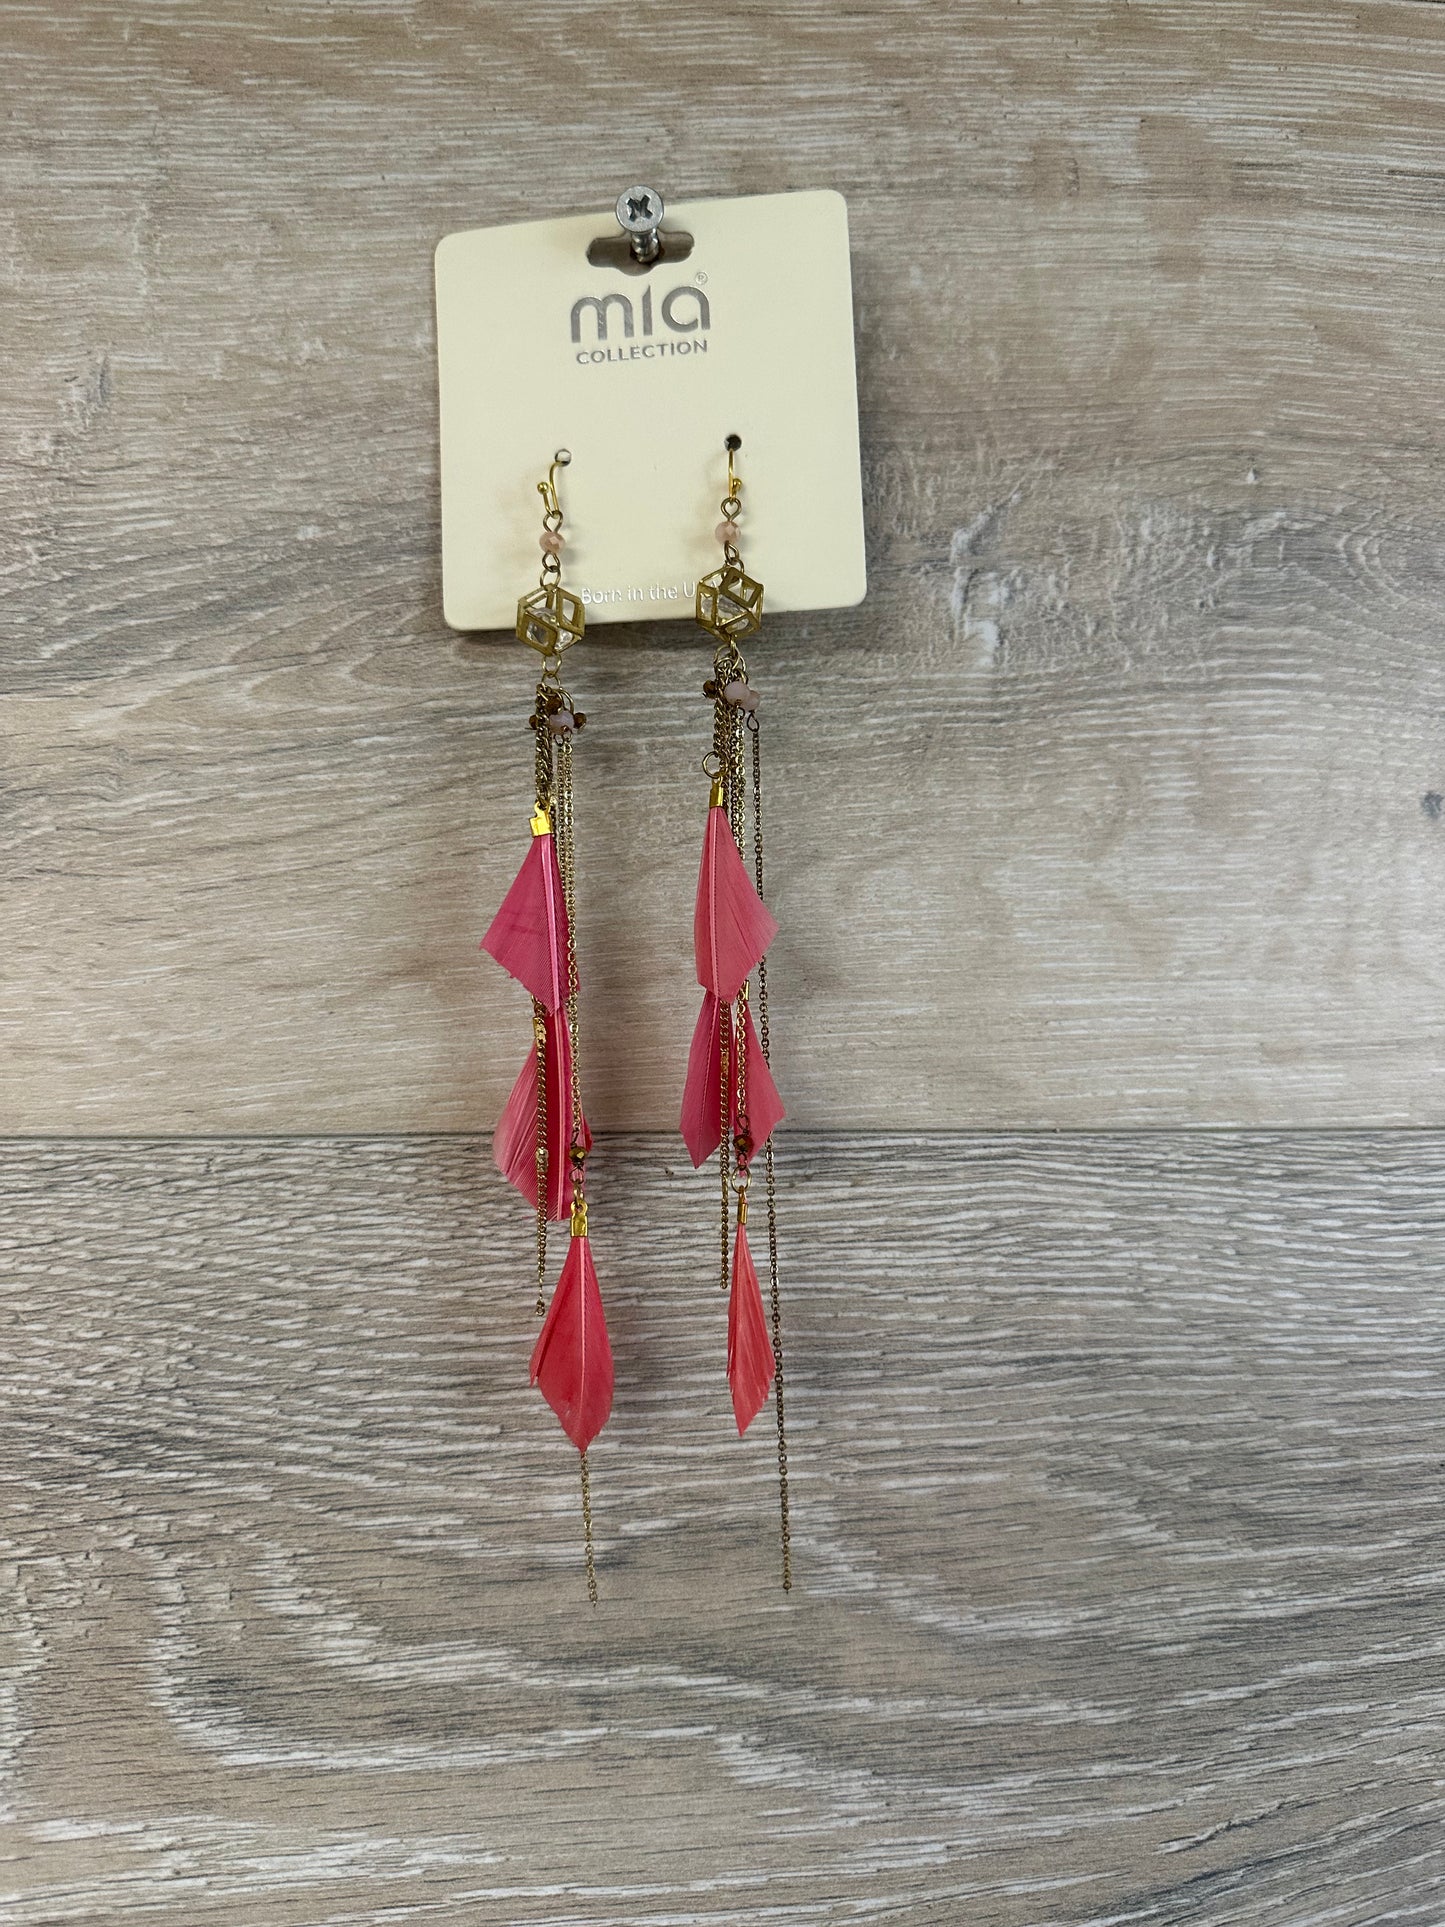 Mia Collection Gold Drop/Dangle Earrings with Pink Feathers